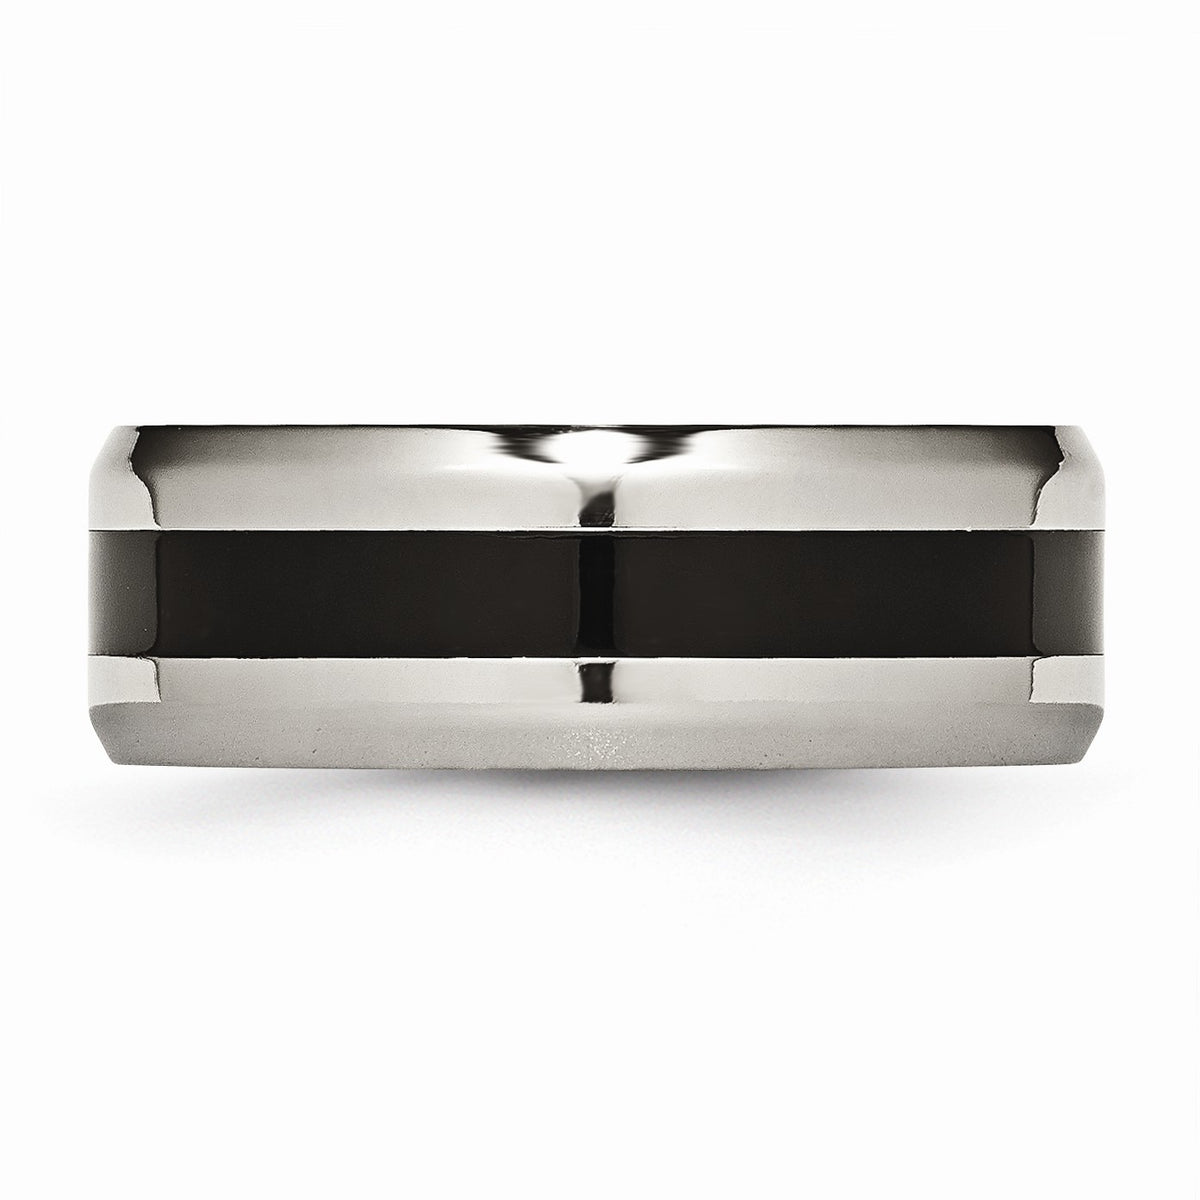 Alternate view of the Titanium and Black Enamel, 8mm Striped Comfort Fit Band by The Black Bow Jewelry Co.